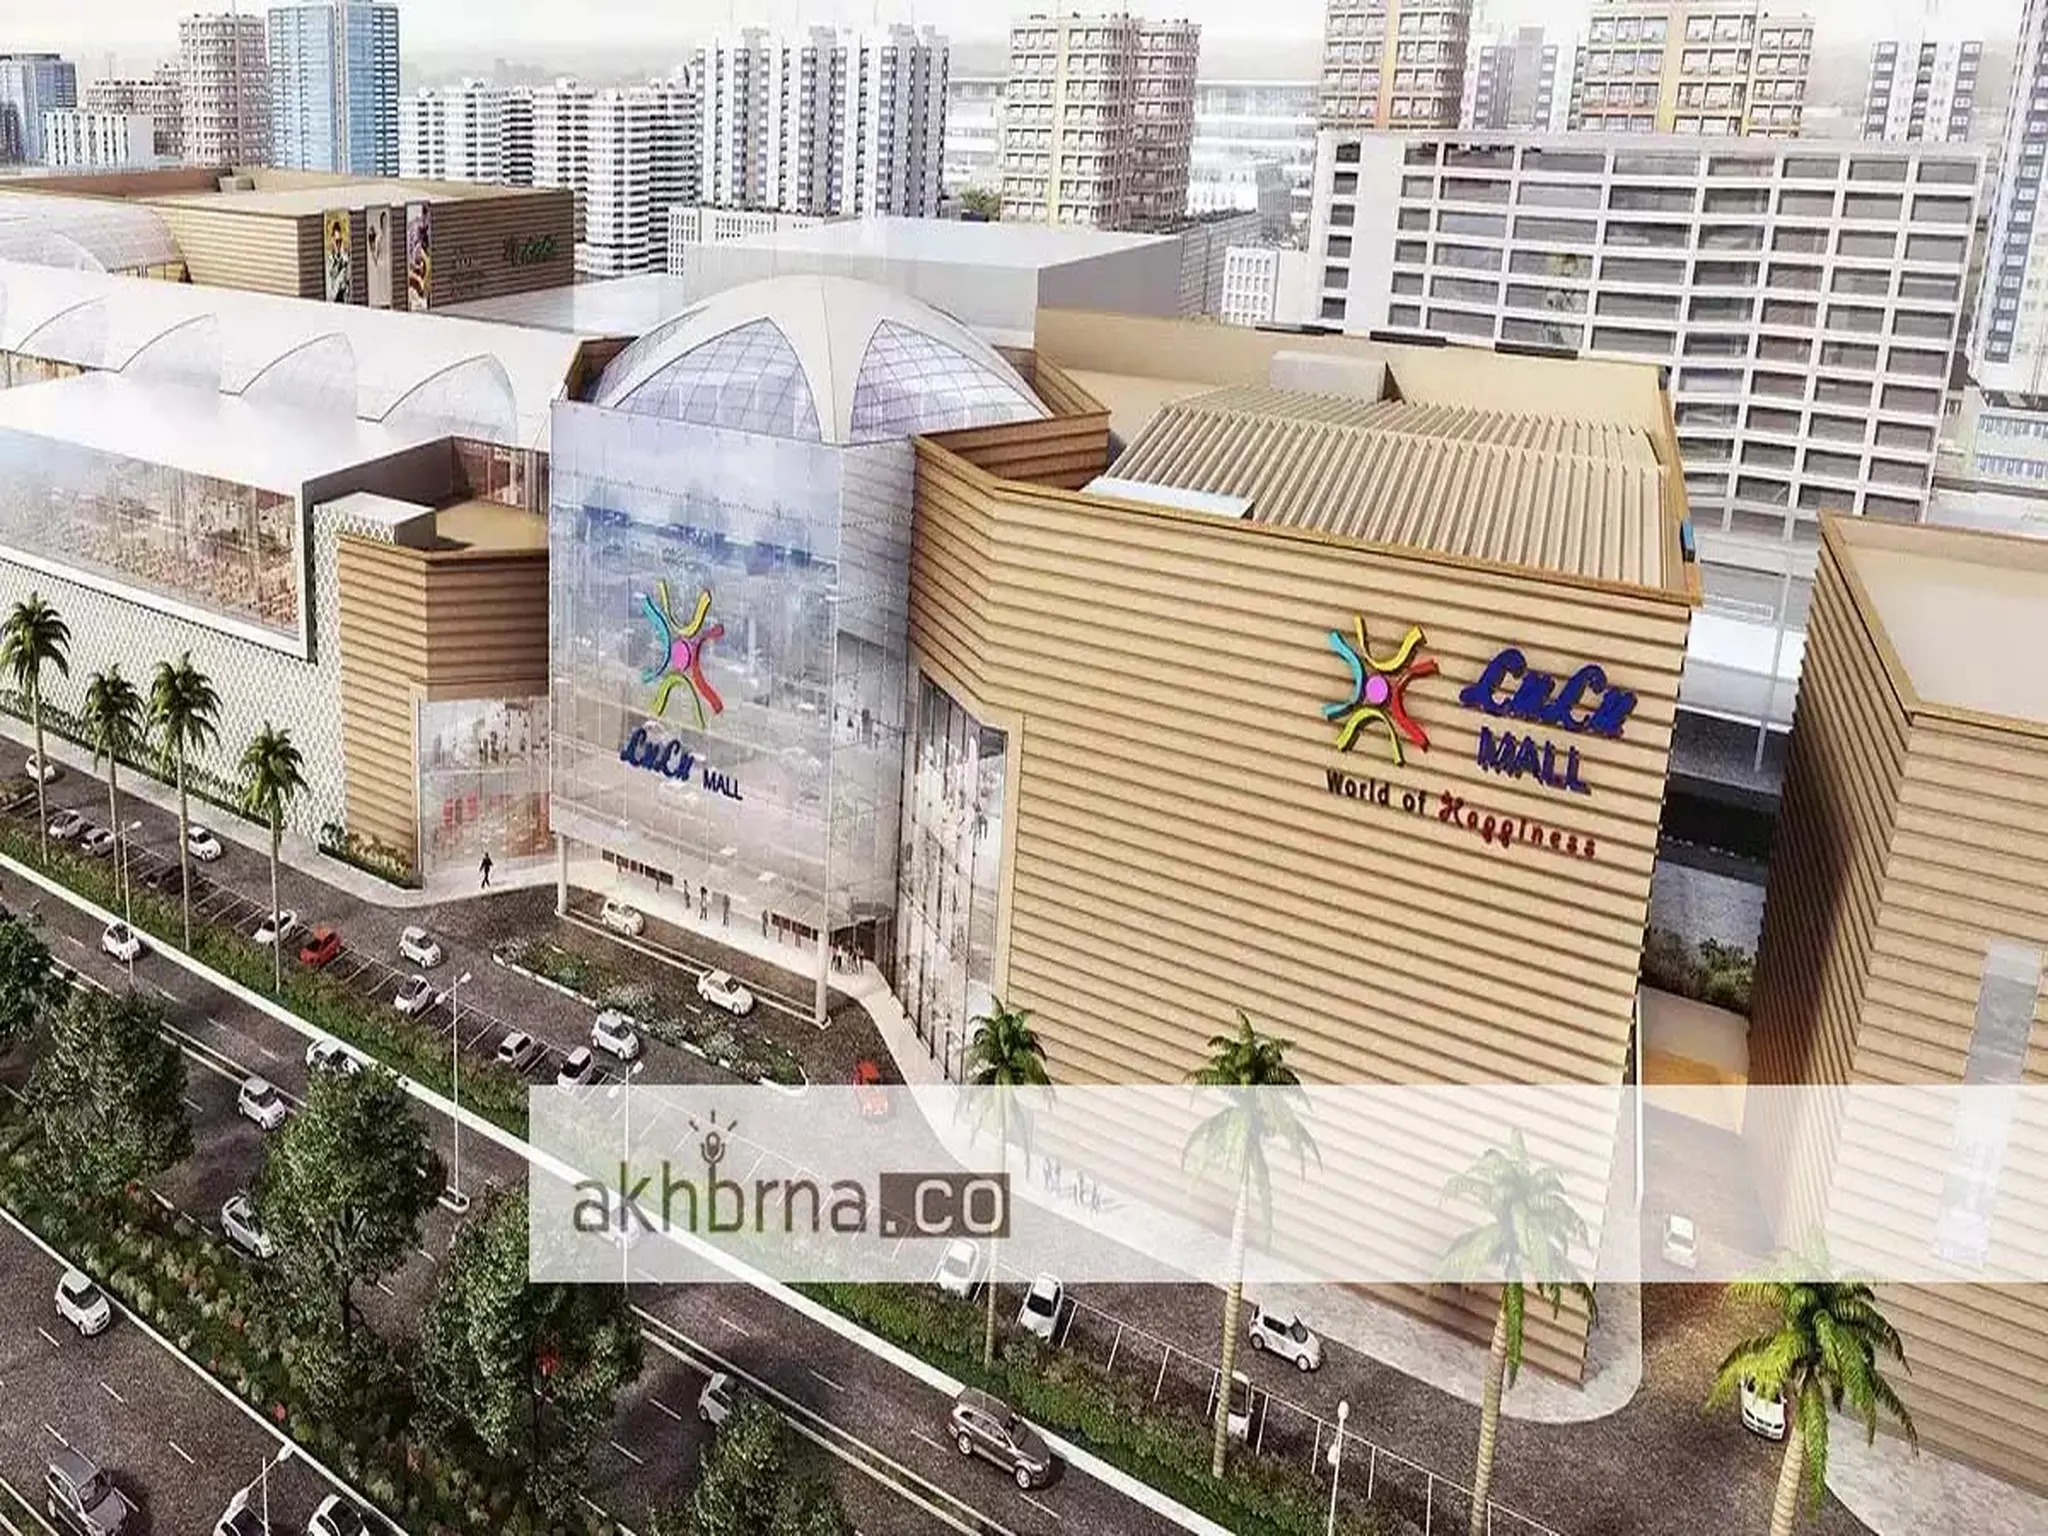 Lulu Mall in Hyderabad; City's New Mega Retail Destination, Will Open in August